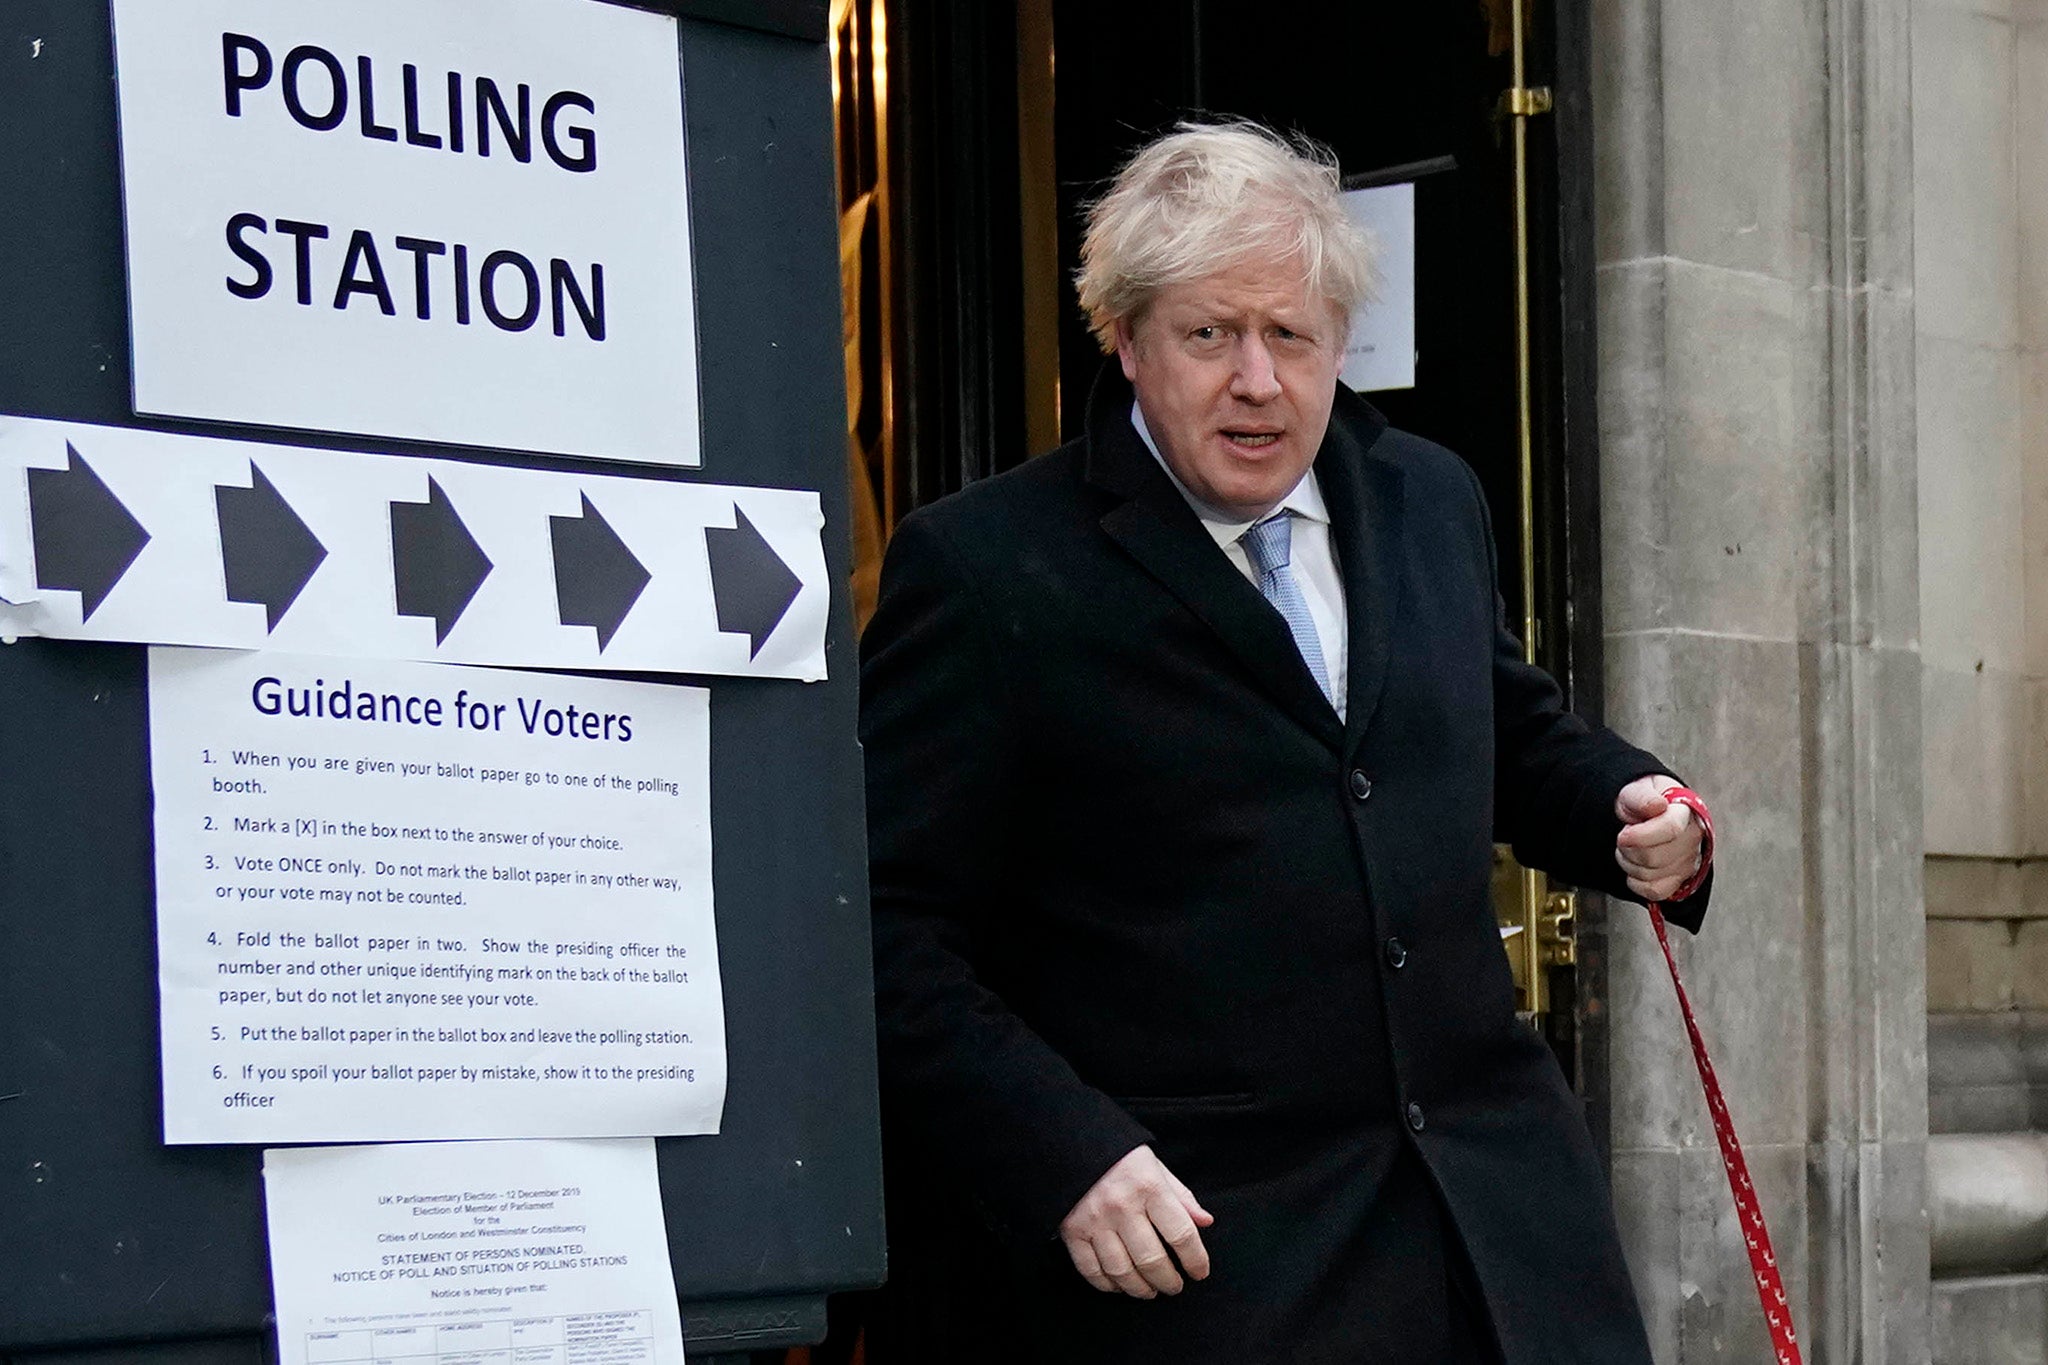 Johnson had to make several trips to the polling station before he was allowed to cast his vote